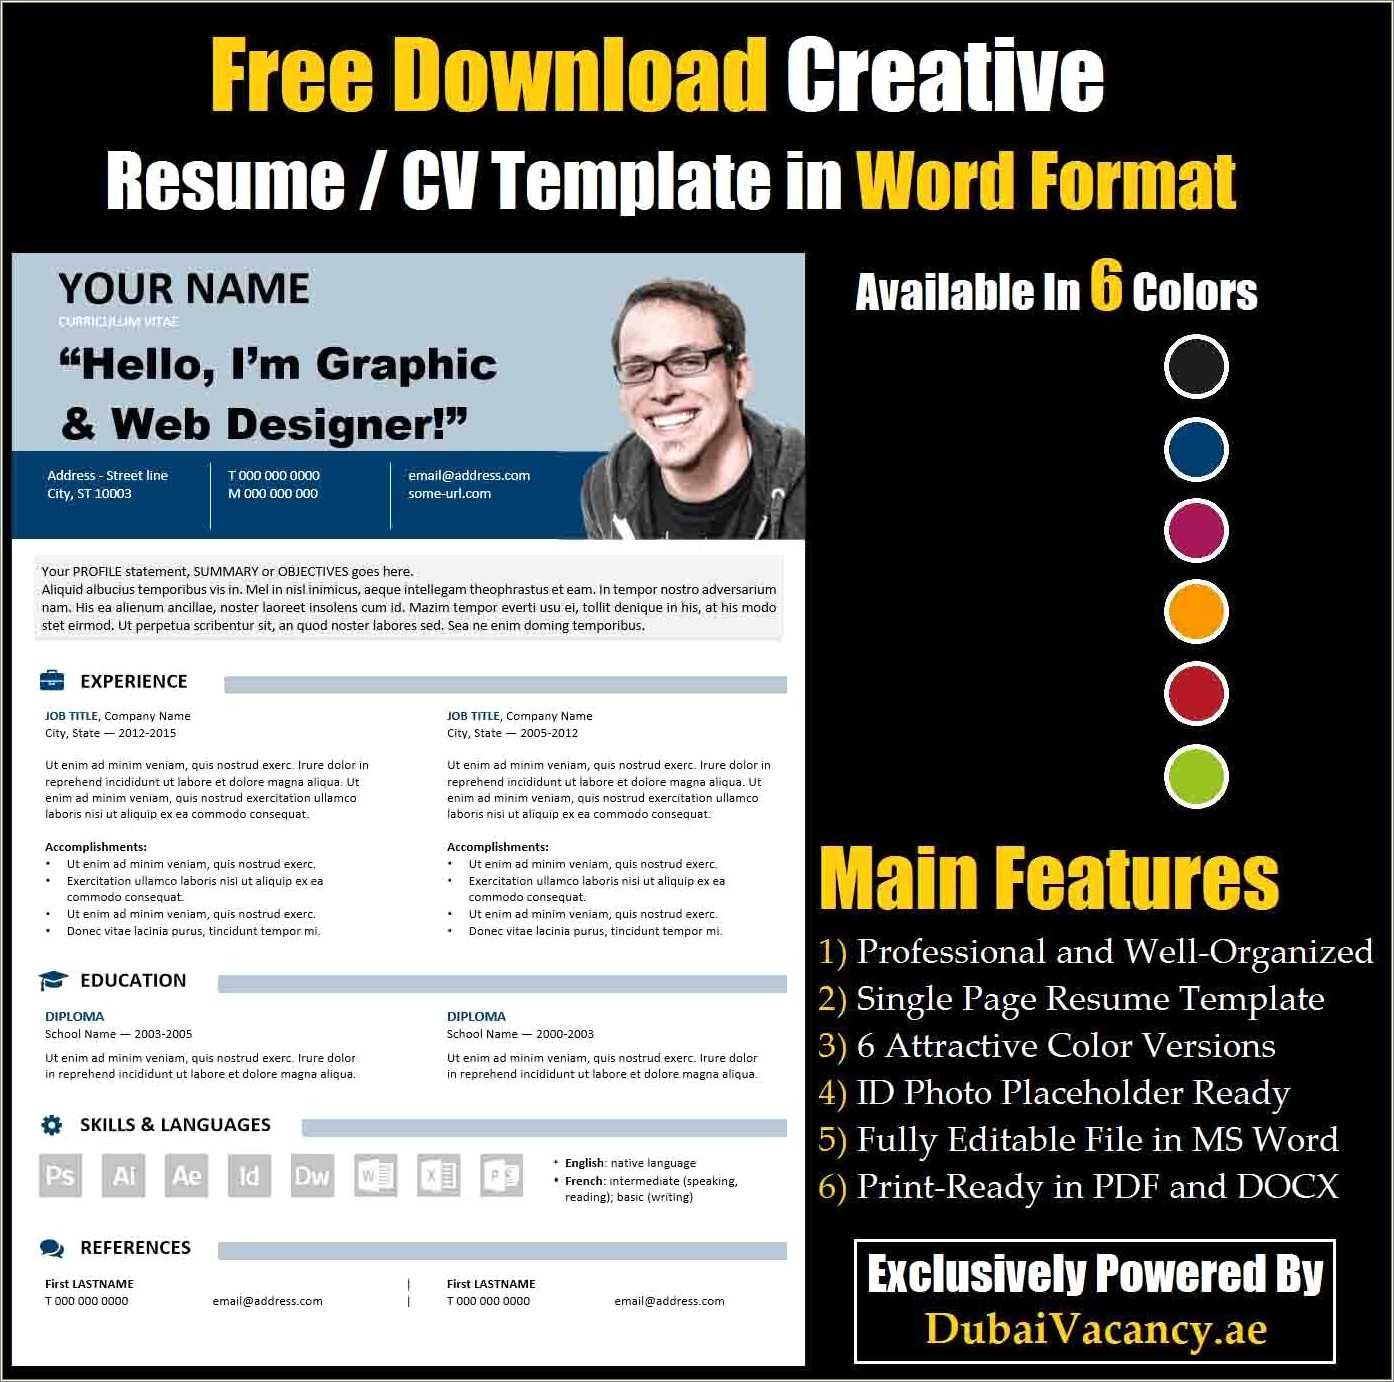 Free Downloadable Resume Templates For Word 2003 - Resume Example Gallery